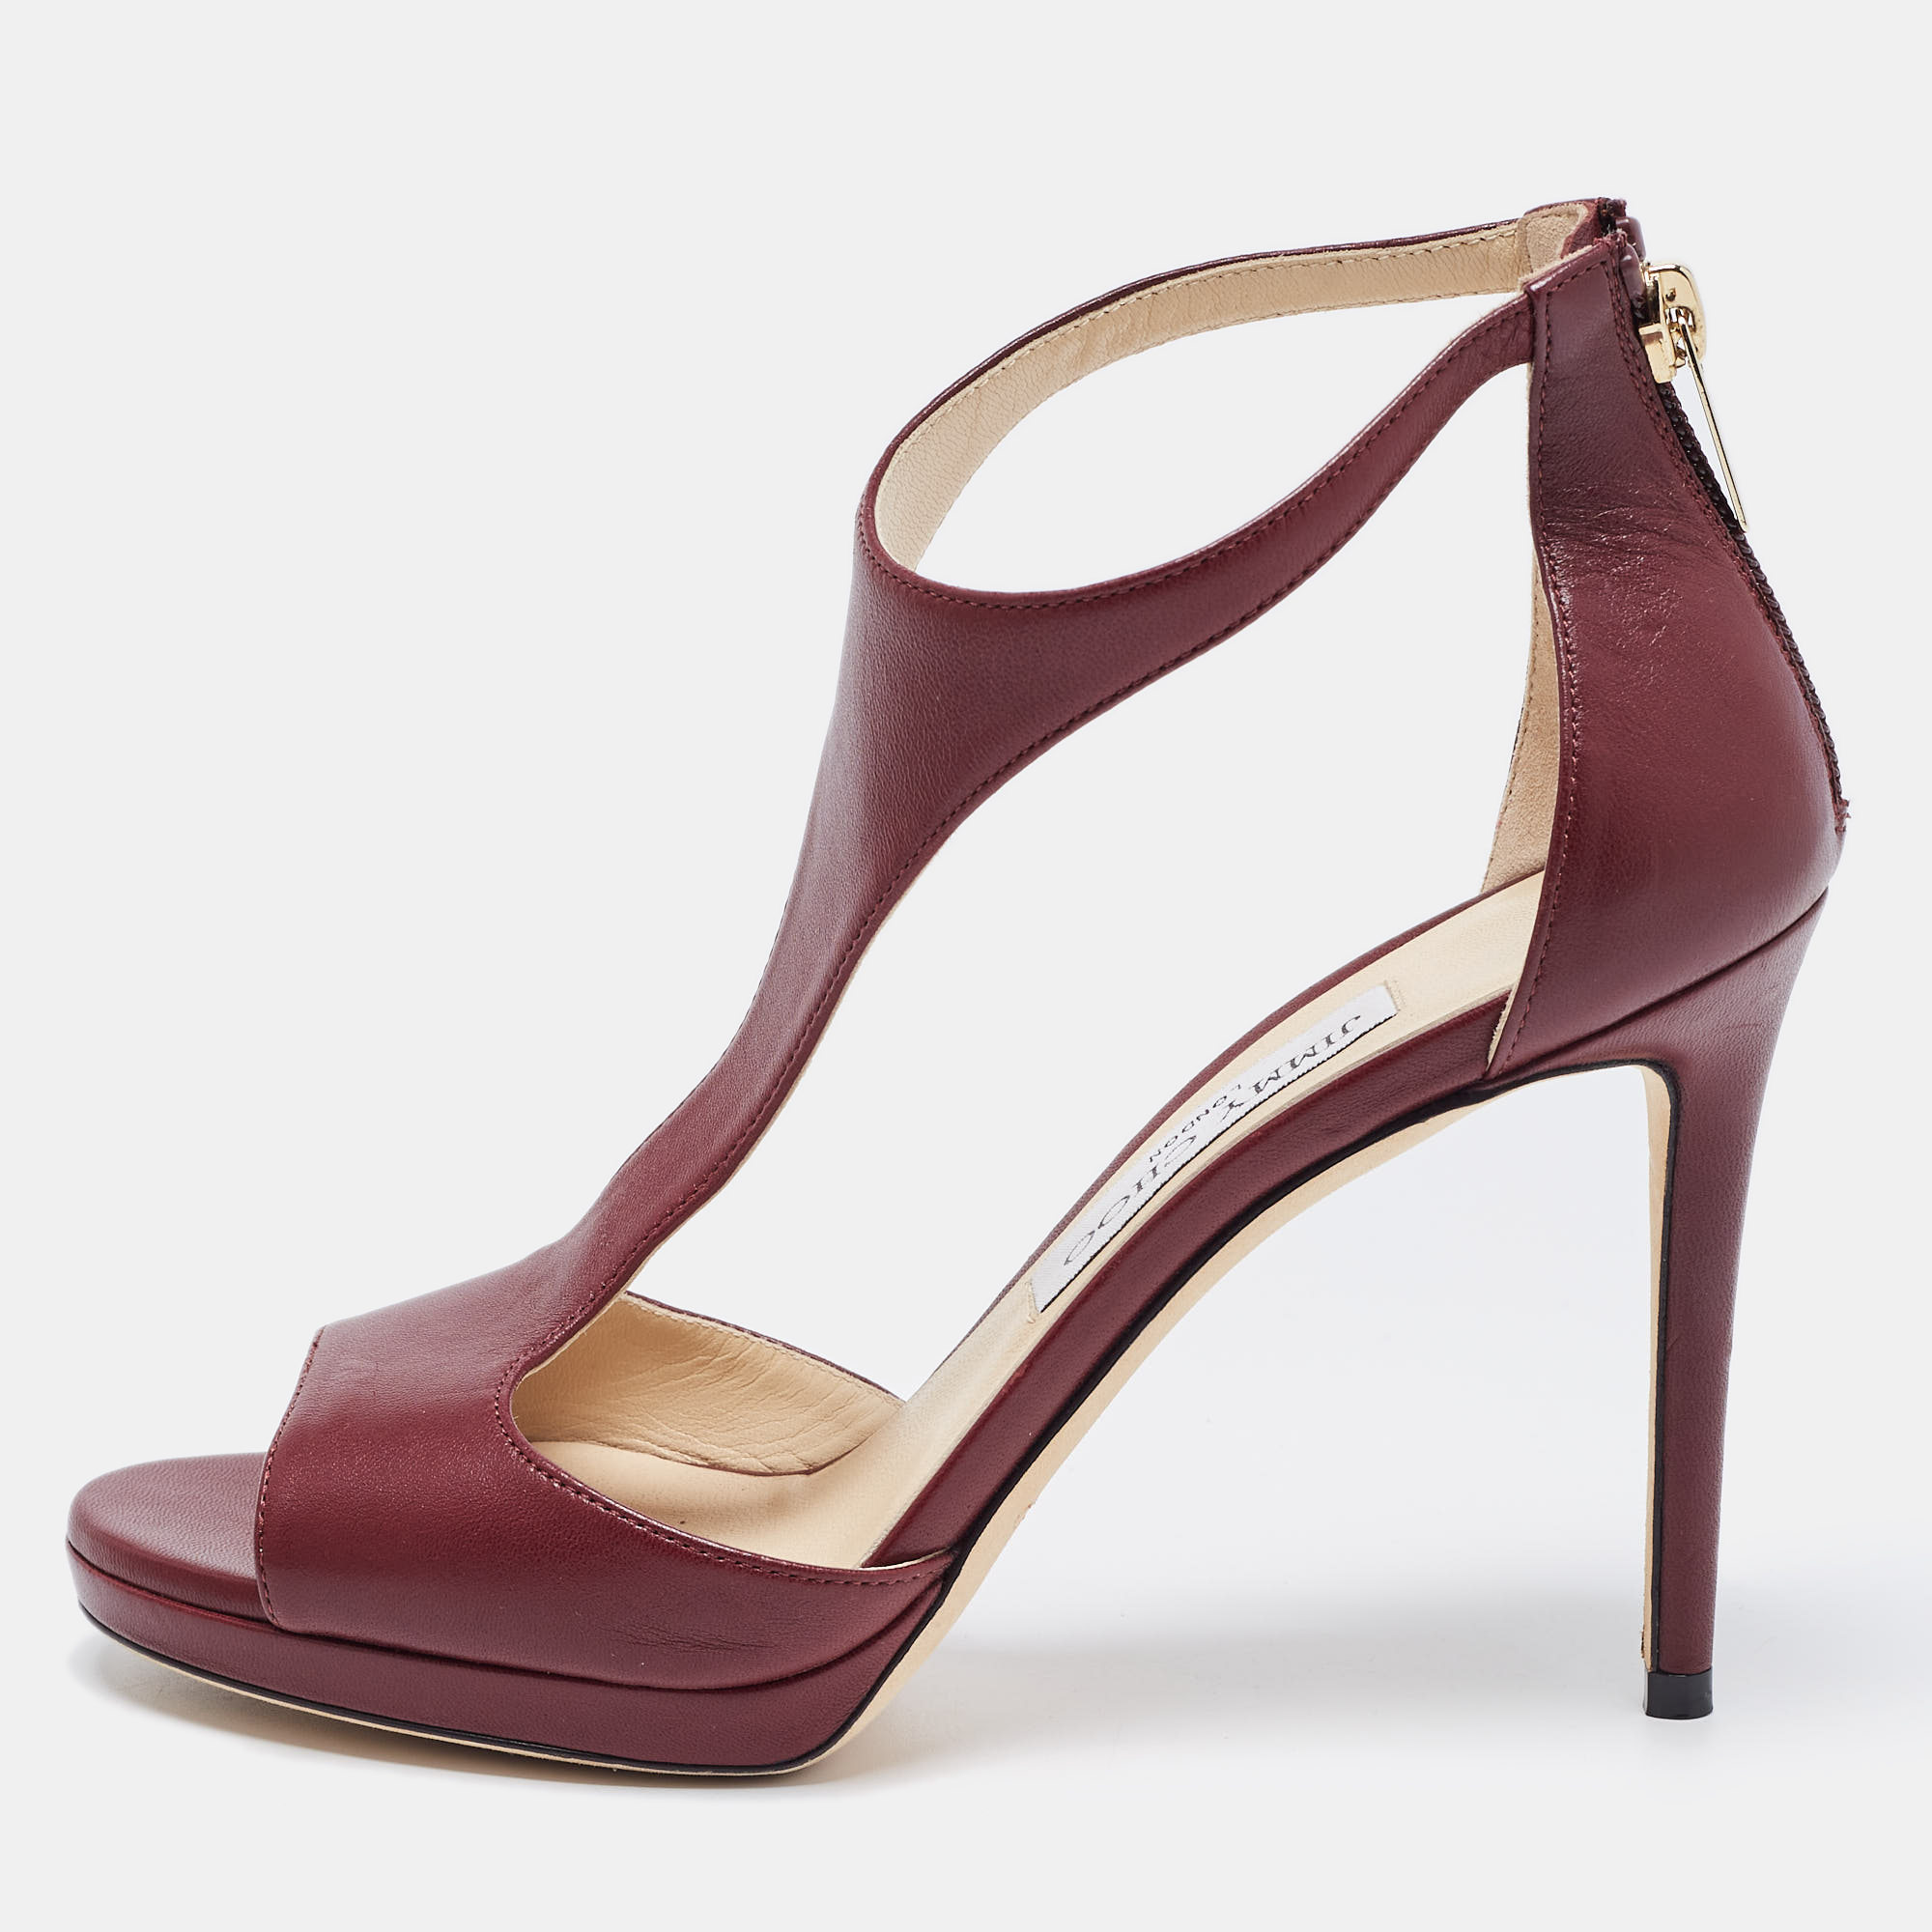 Pre-owned Jimmy Choo Burgundy Leather Lana Sandals Size 37.5